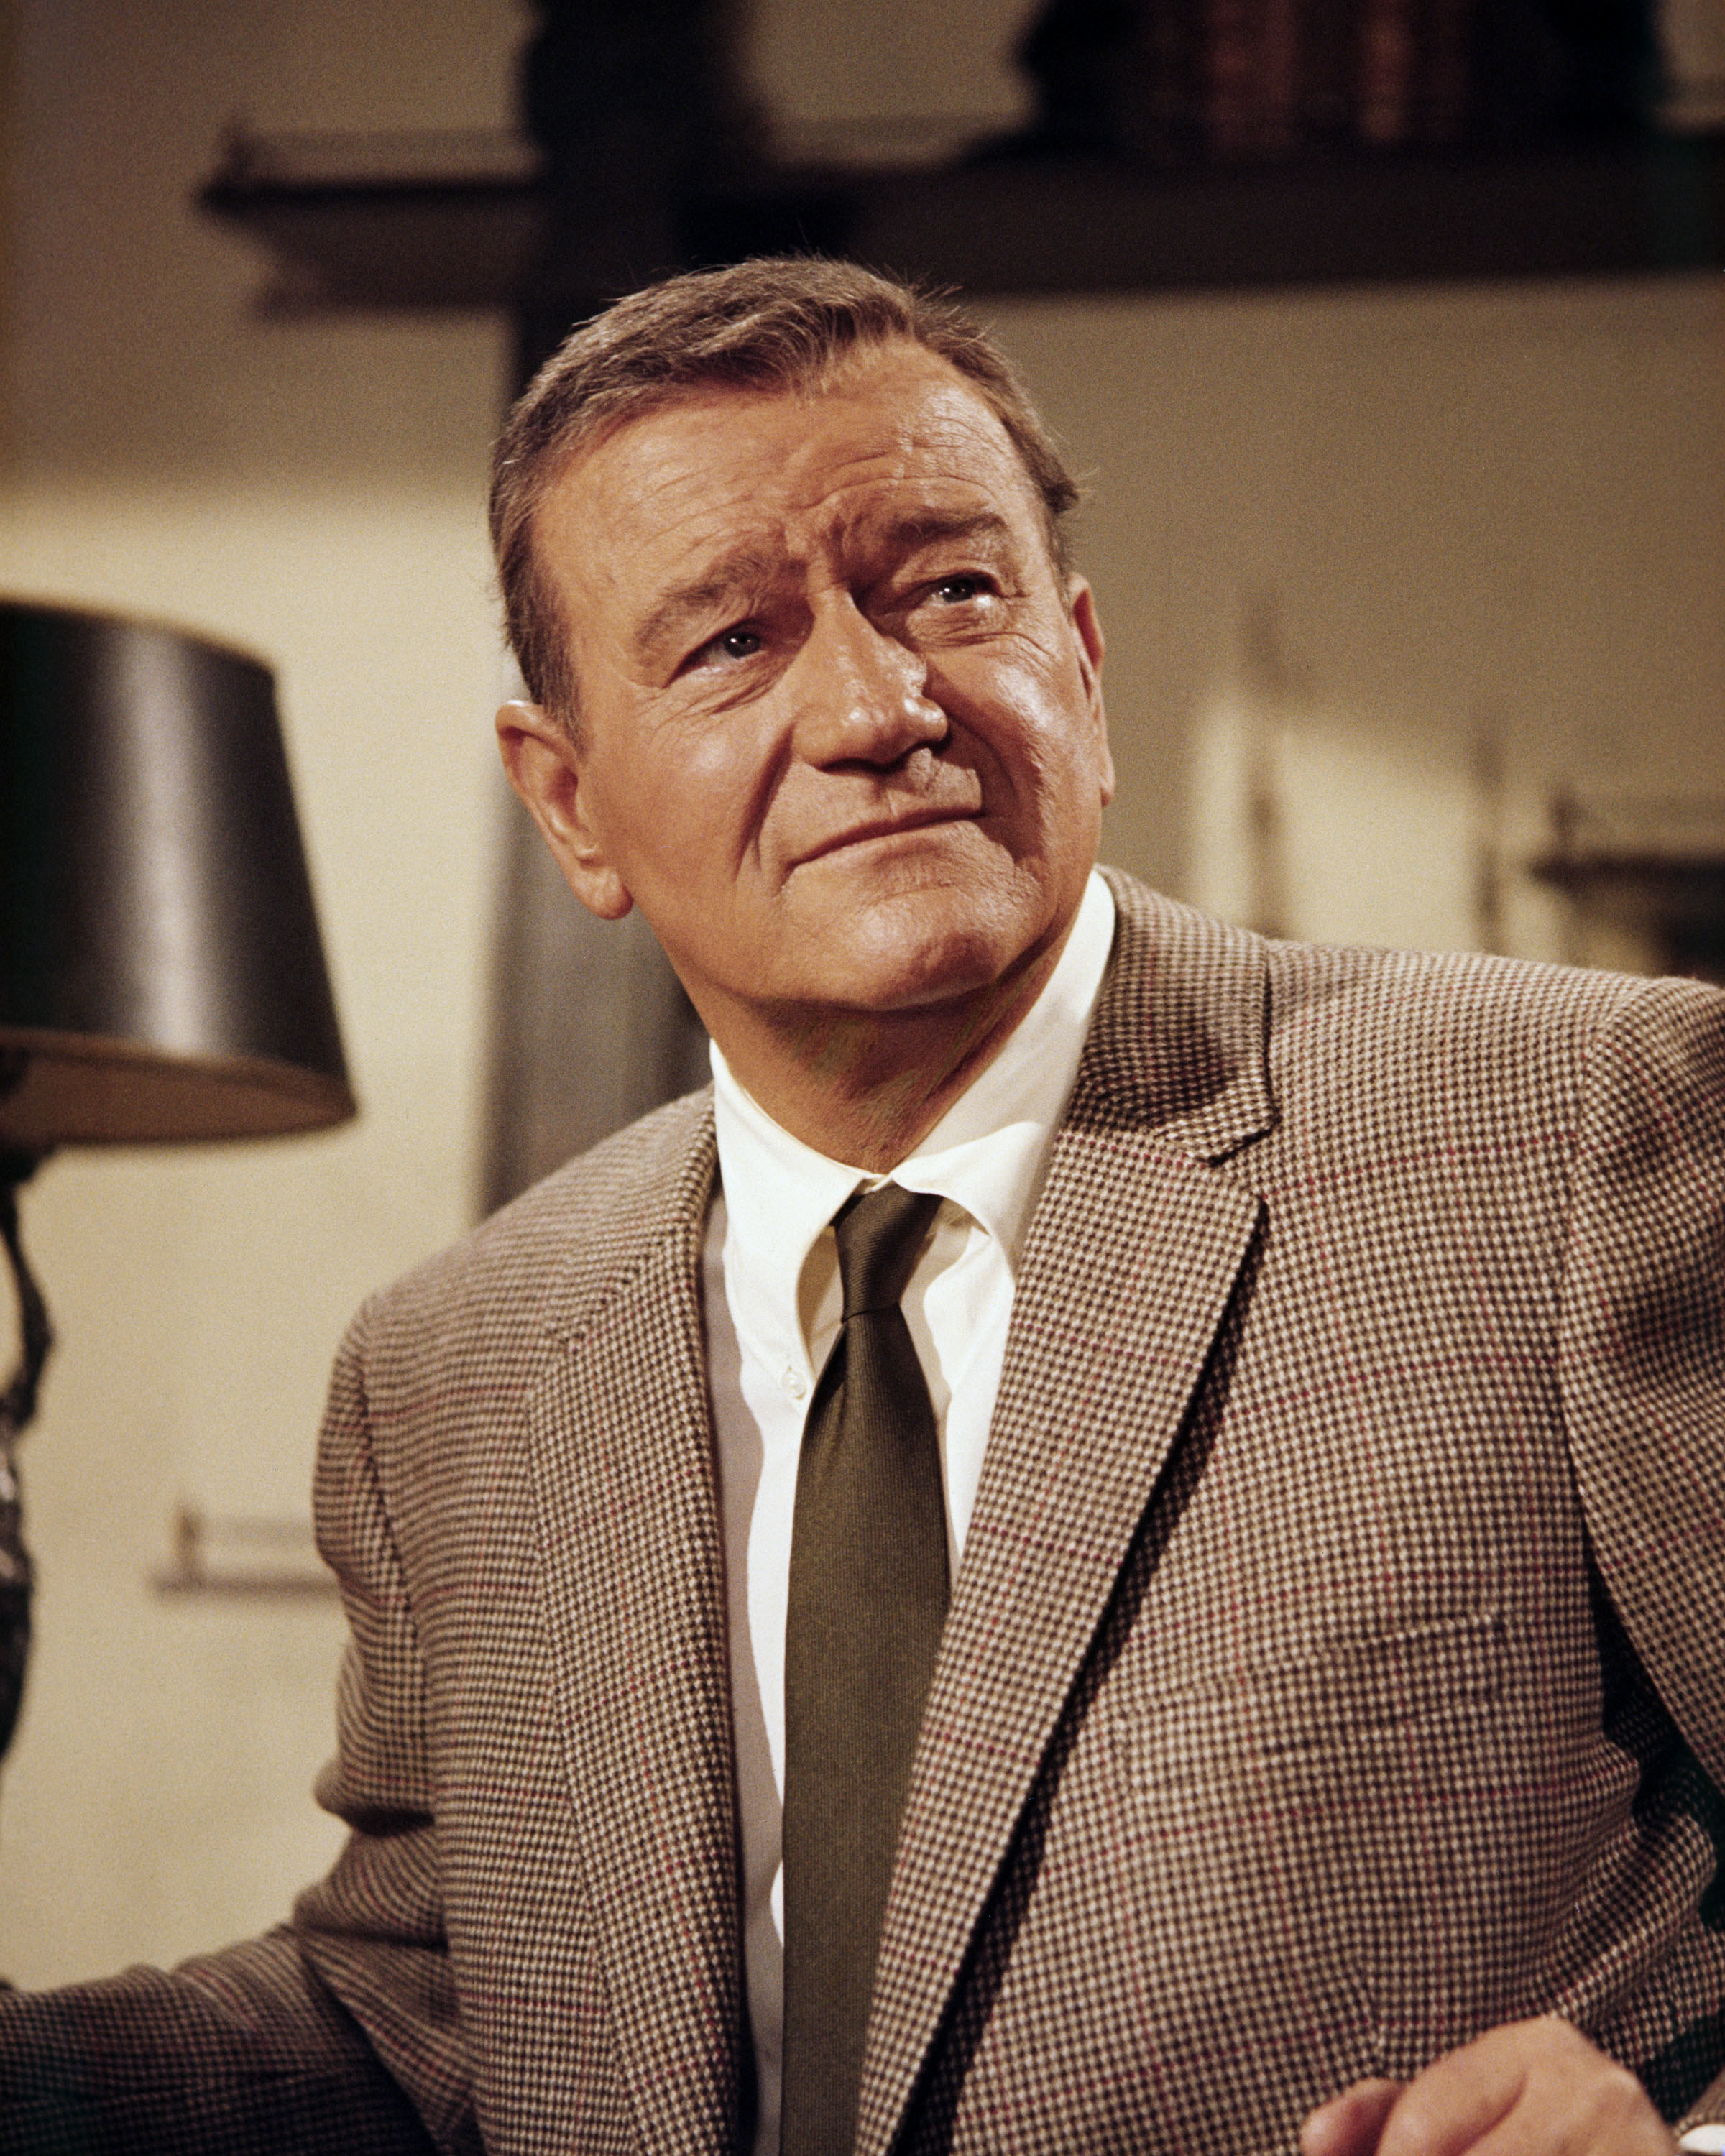 A portrait of John Wayne wearing a suit and tie